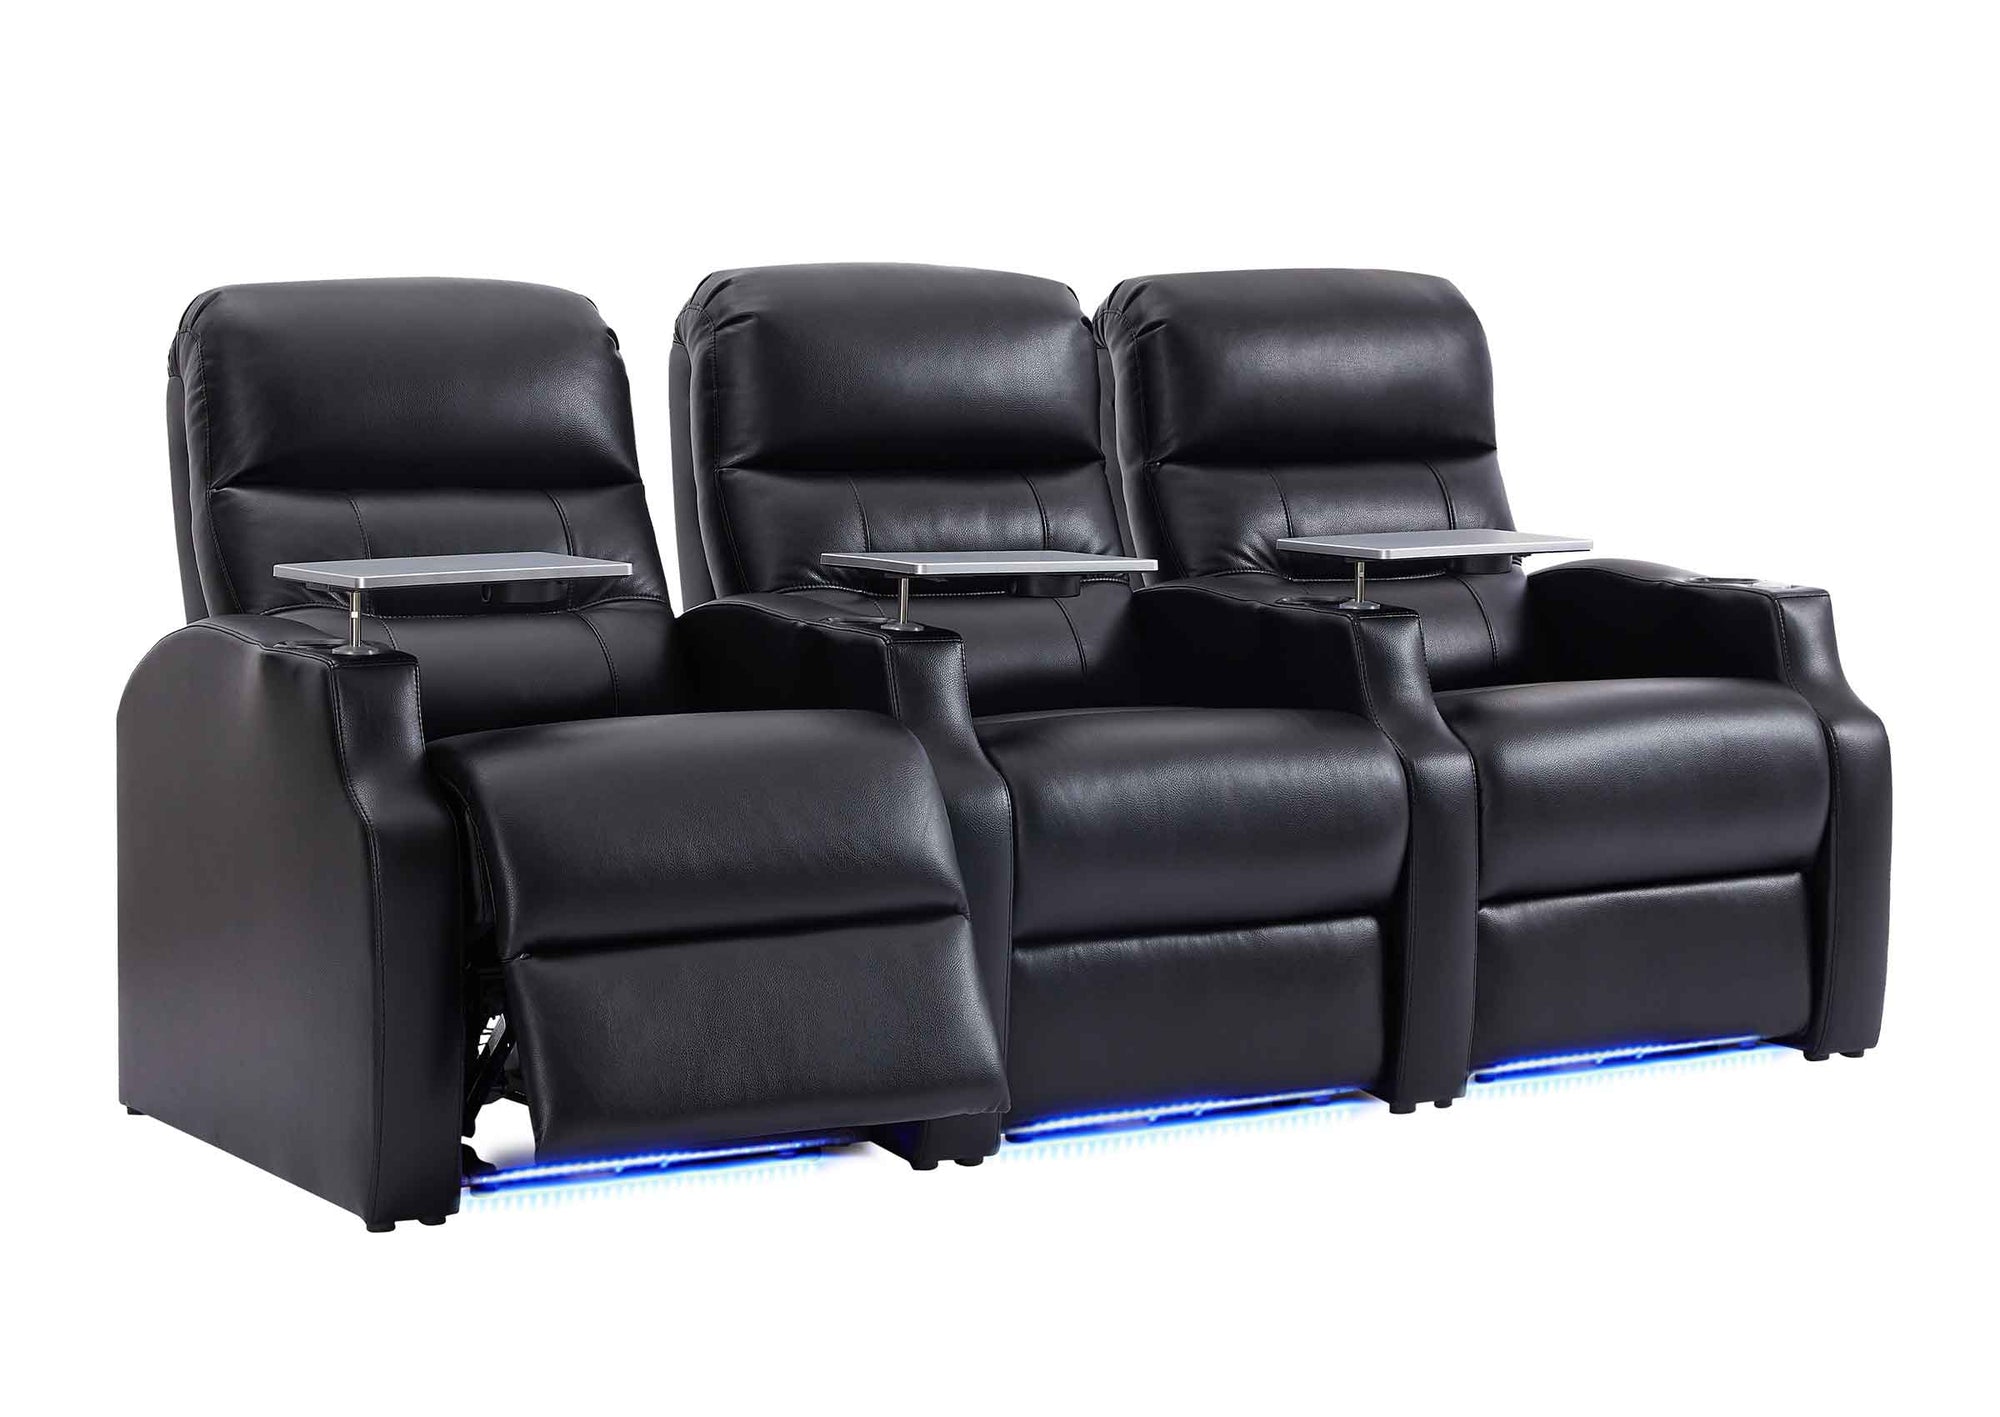 red movie theater seats